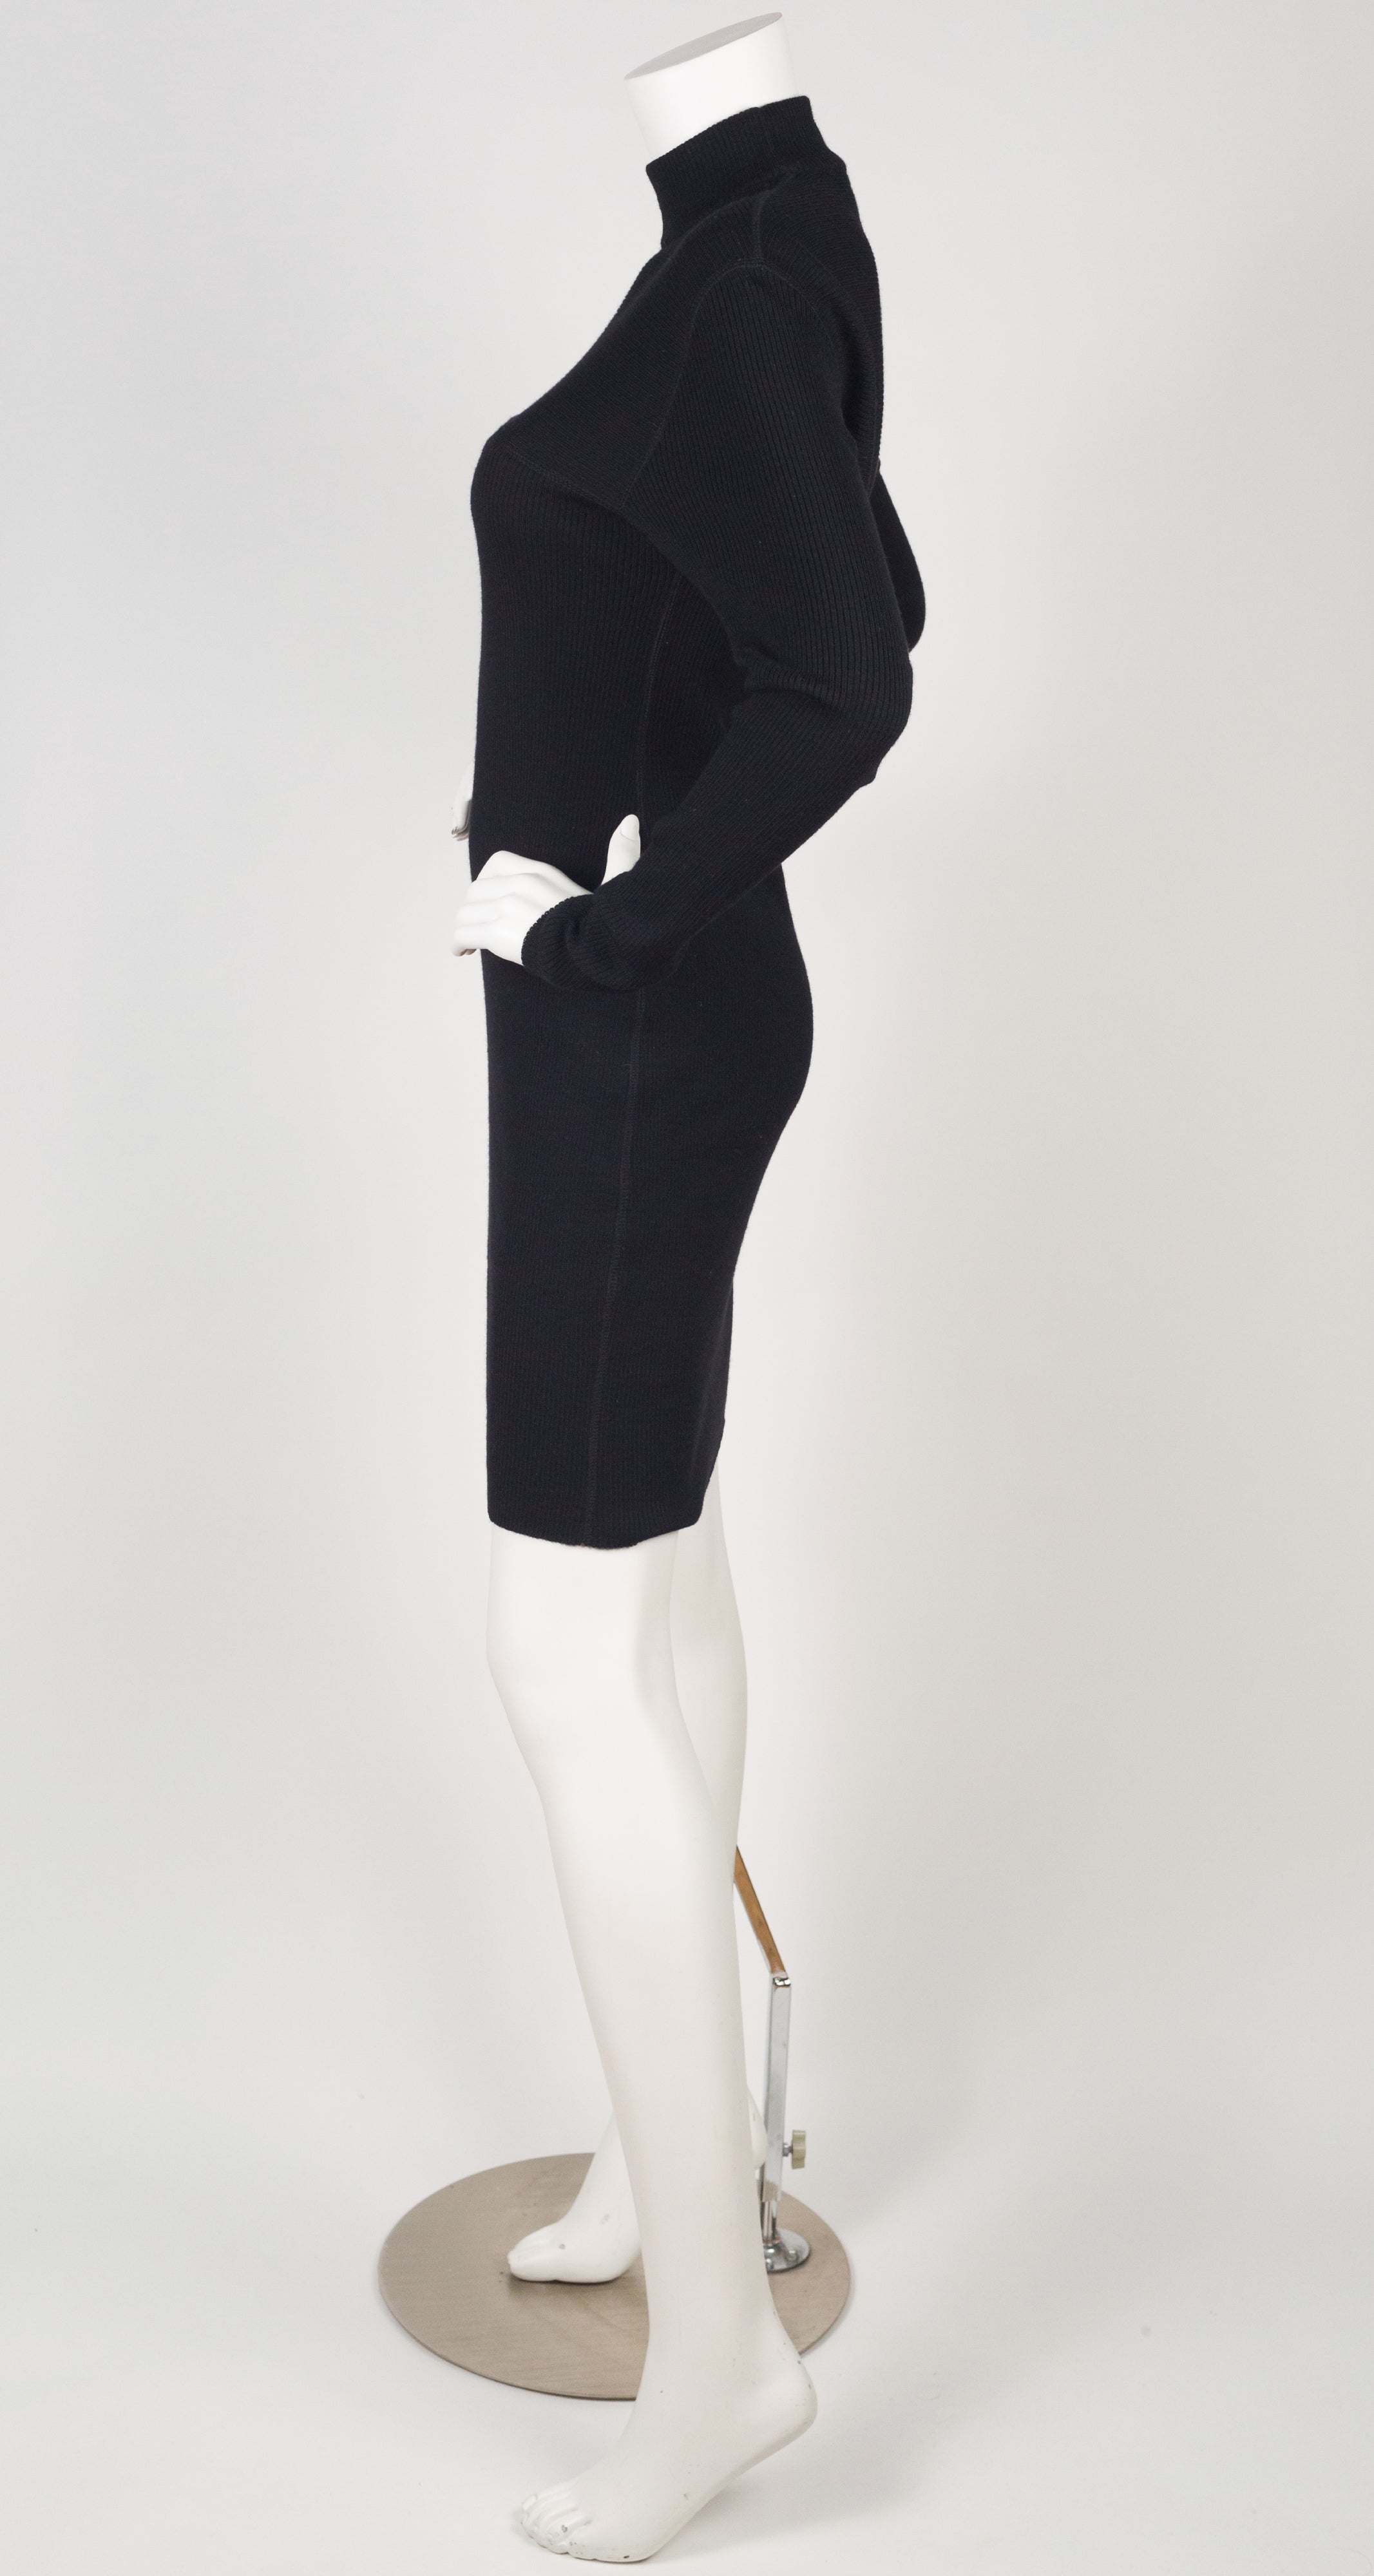 1980s Cut-Out Black Ribbed Wool Bodycon Dress